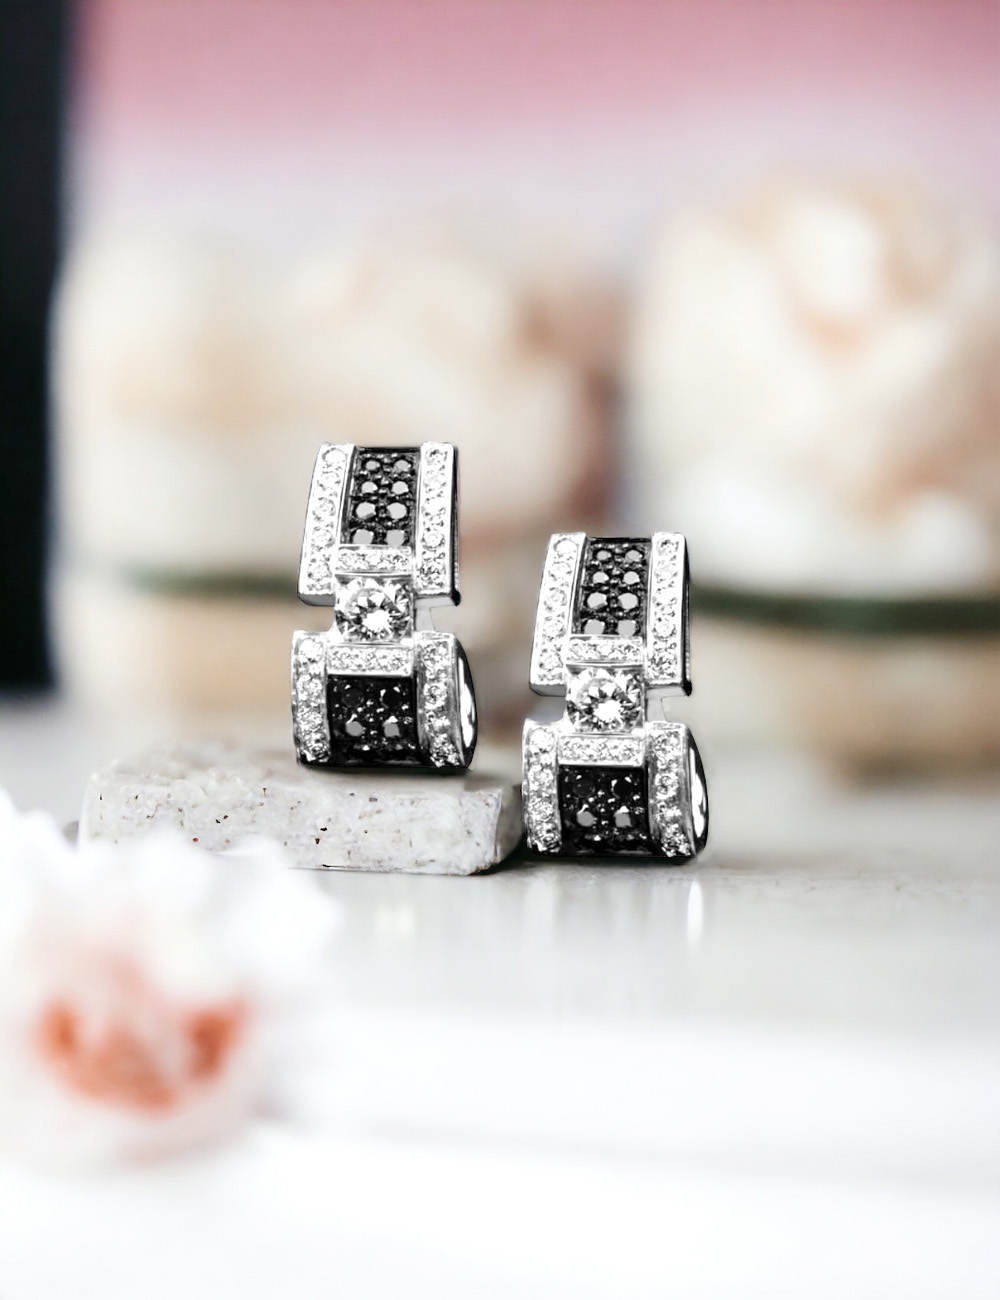 White gold earrings with black and white diamonds for timeless luxury.